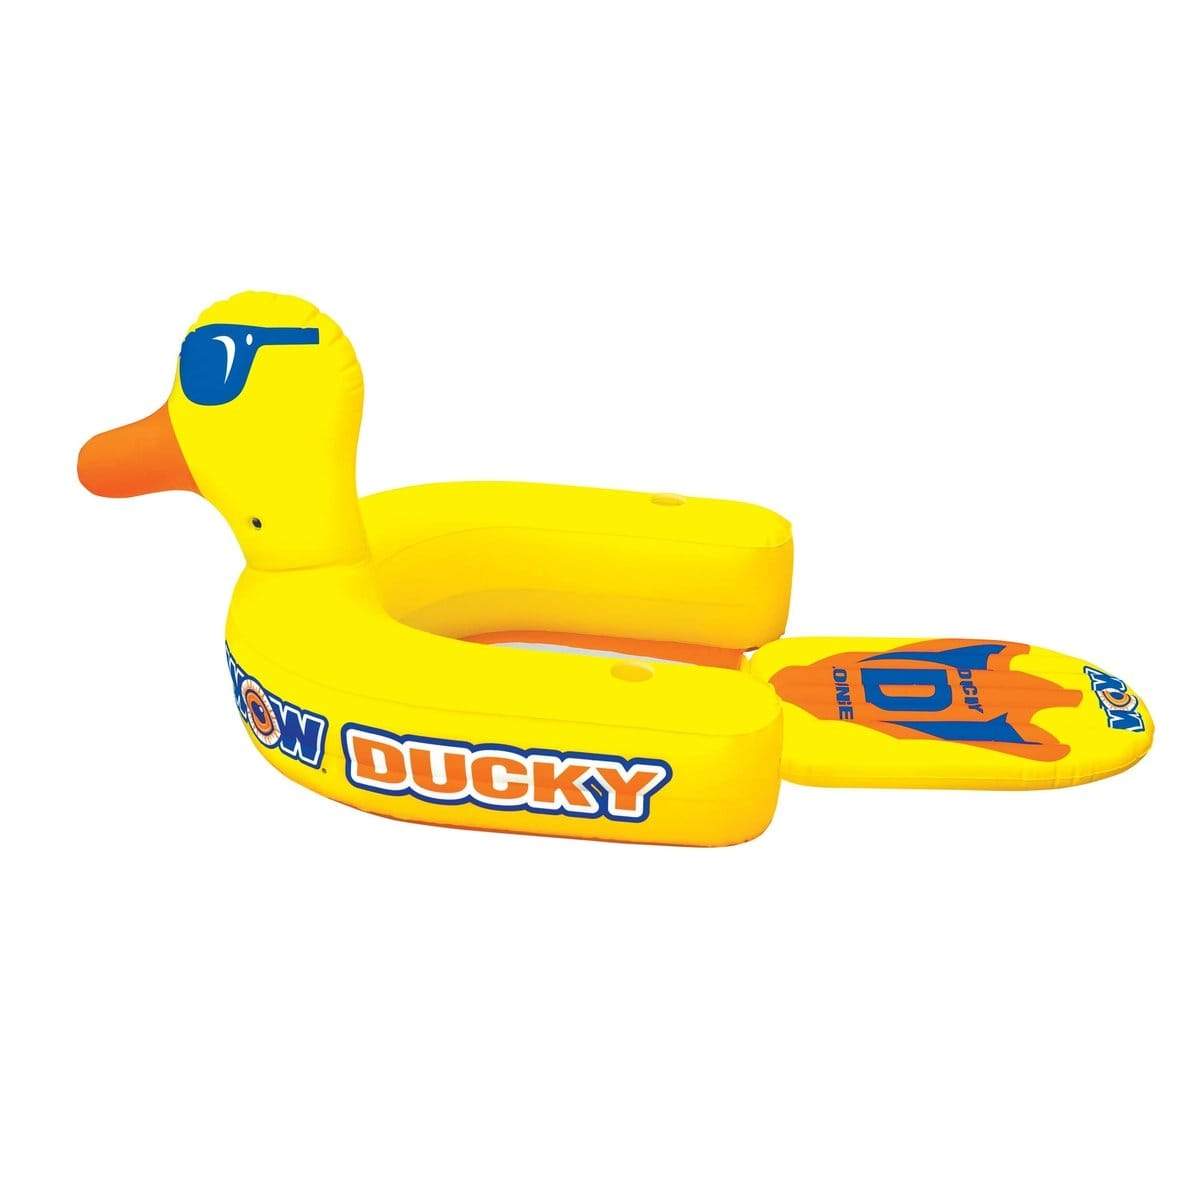 WOW World of Watersports Qualifies for Free Shipping WOW World of Watersports Ducky Lounge #19-2000